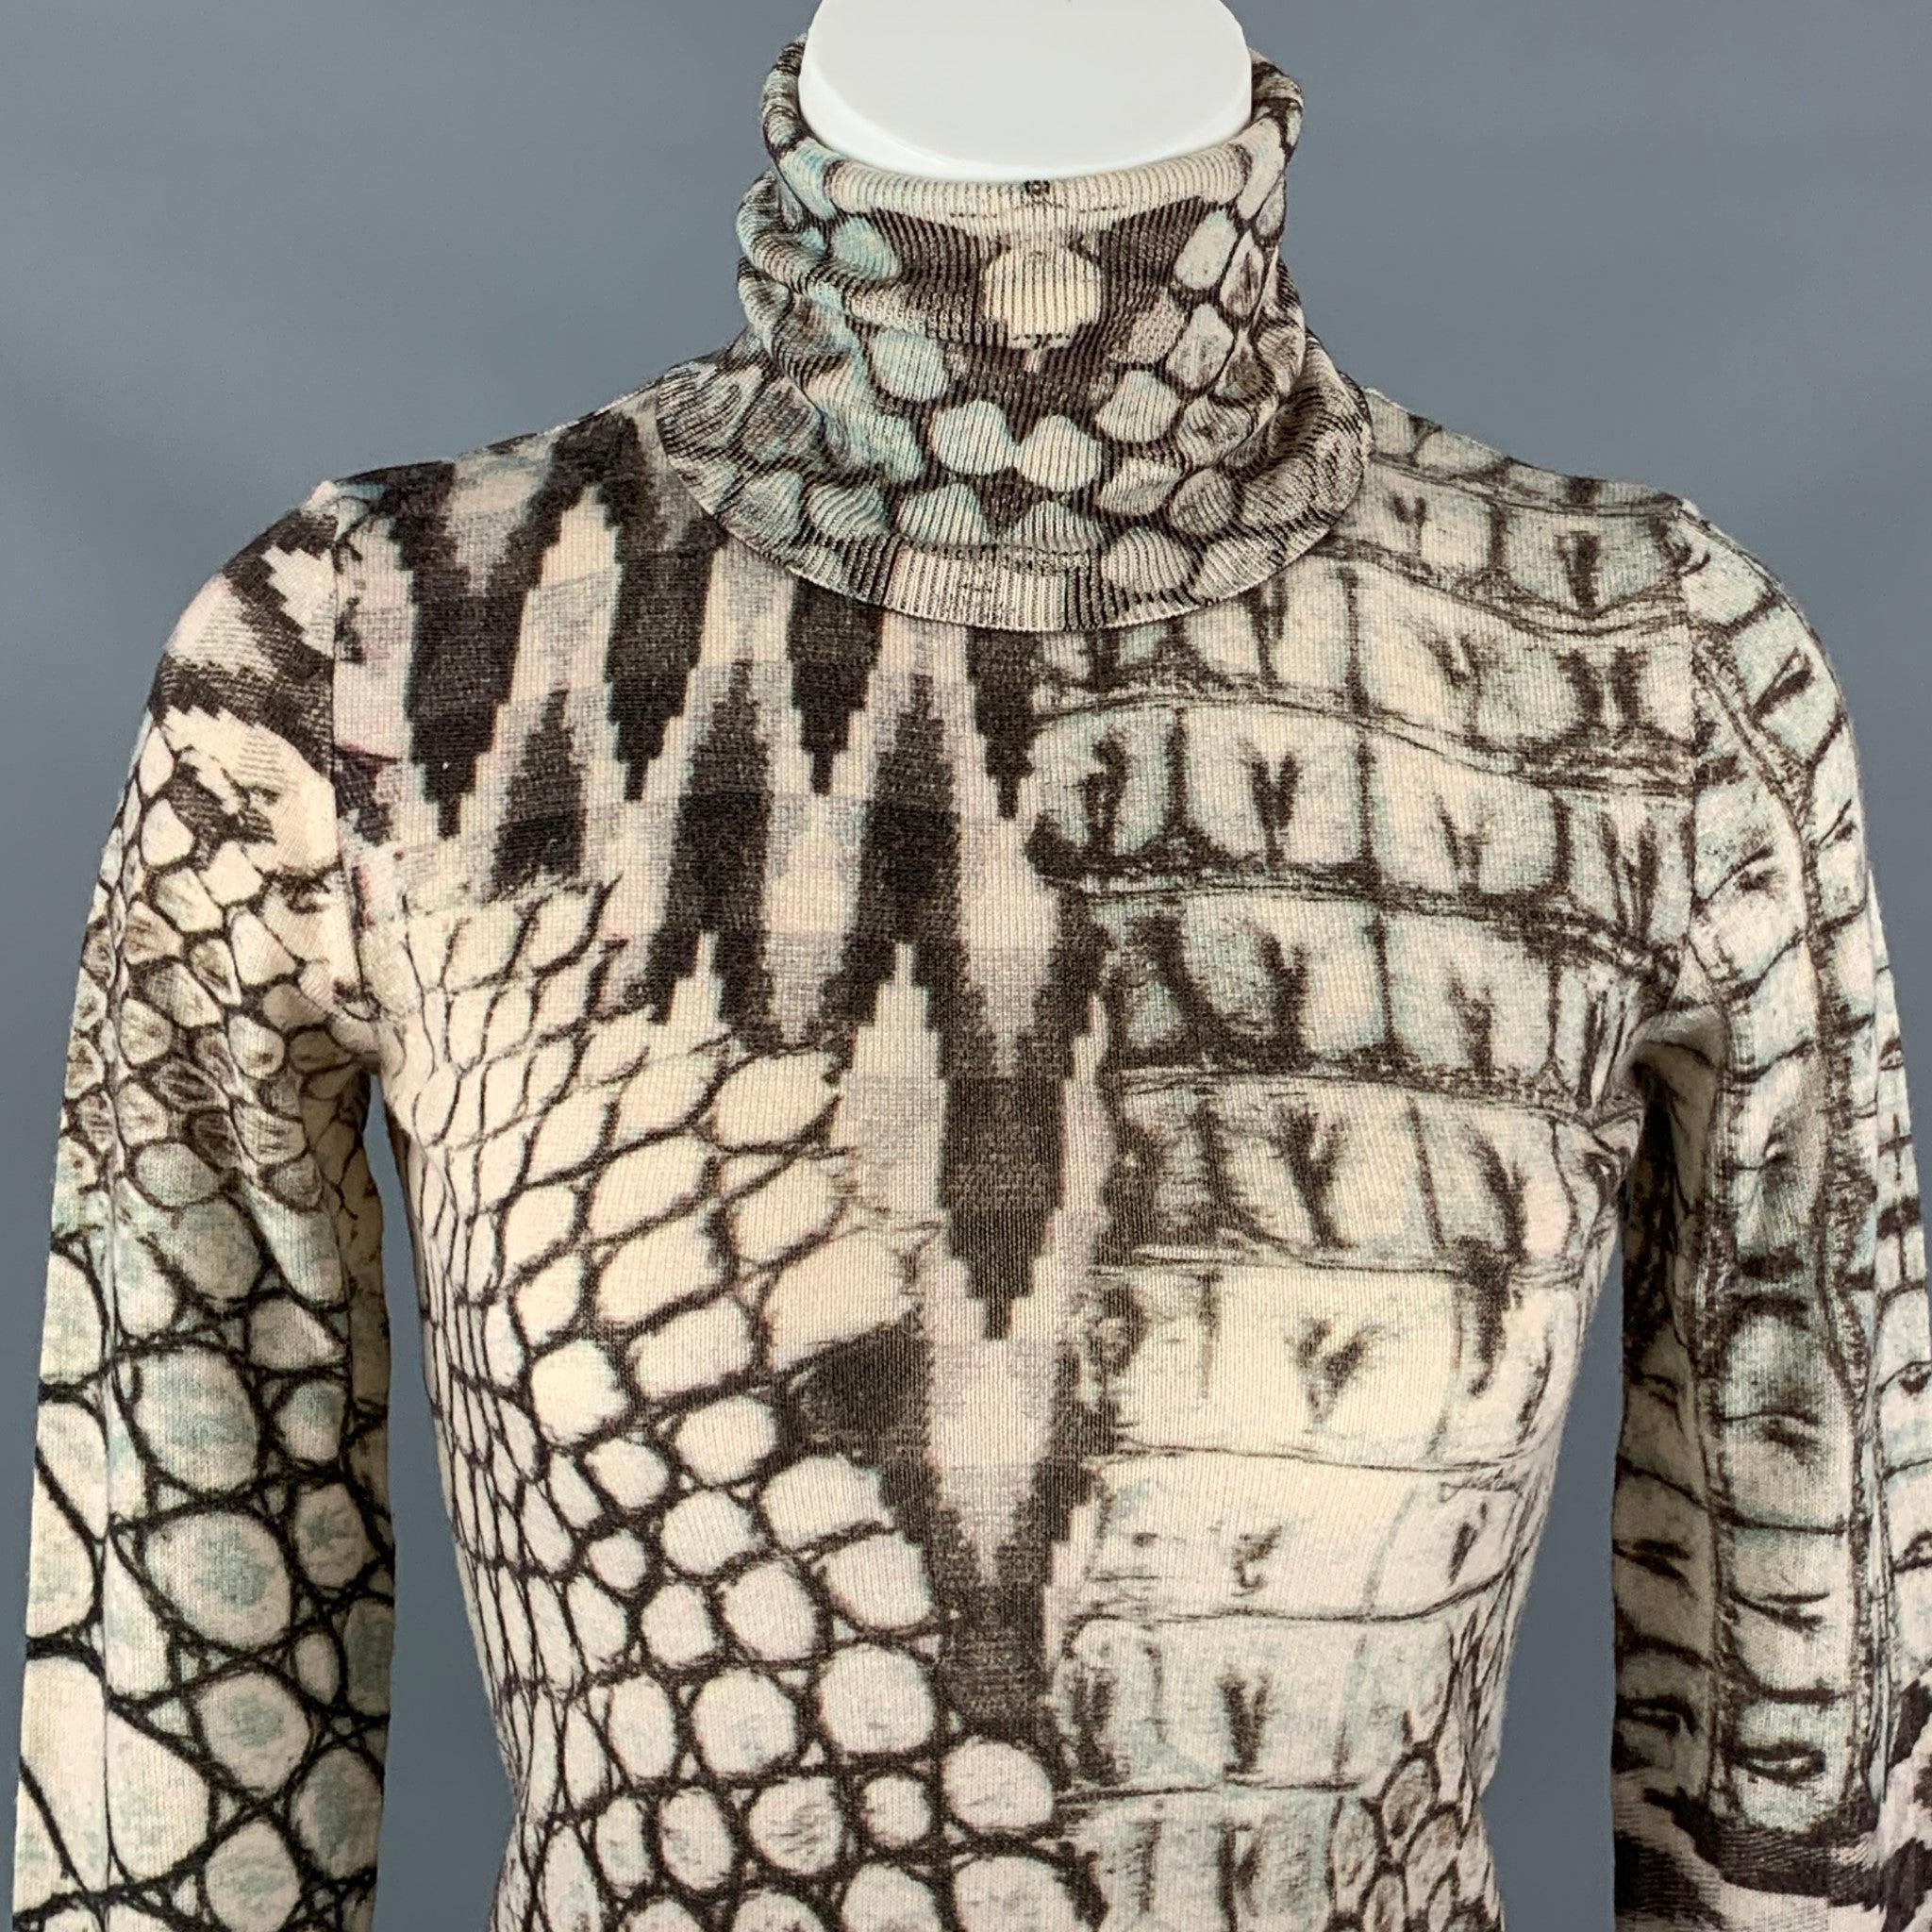 JUST CAVALLI pullover sweater comes in a cream and taupe snake print
  wool featuring DETAIL, a turtleneck long sleeves. Made in Italy. Excellent Pre-Owned Condition.  
 

 Marked:  40 
 

 Measurements: 
  
 Shoulder:
 15 inBust: 30 inSleeve: 26.5